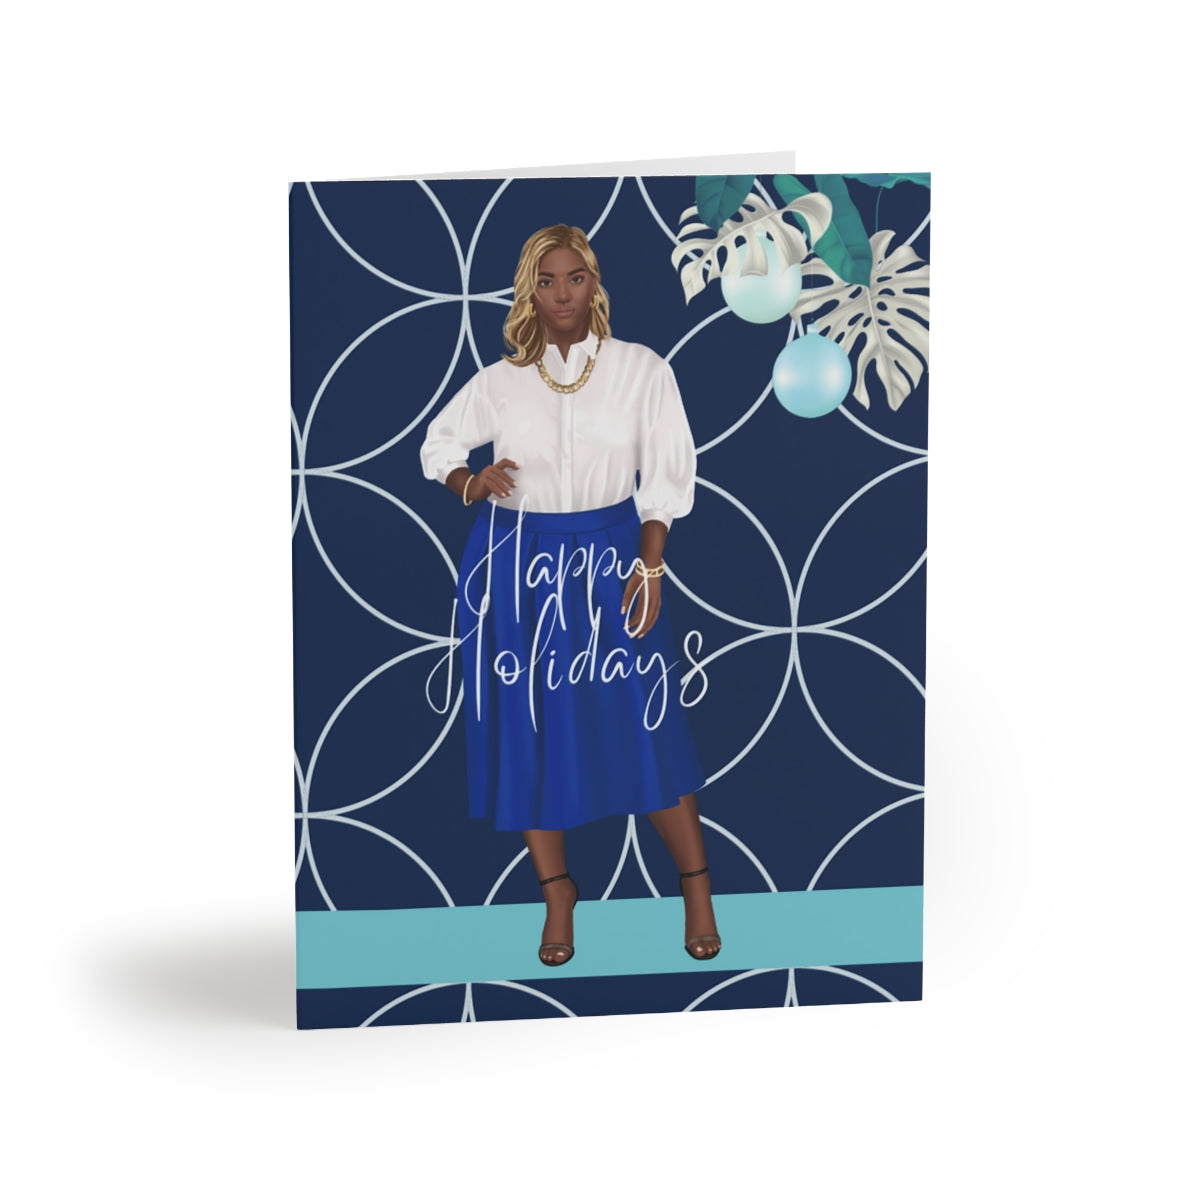 Happy Holiday Greeting cards| Black Woman Holiday Cards| Christmas Cards